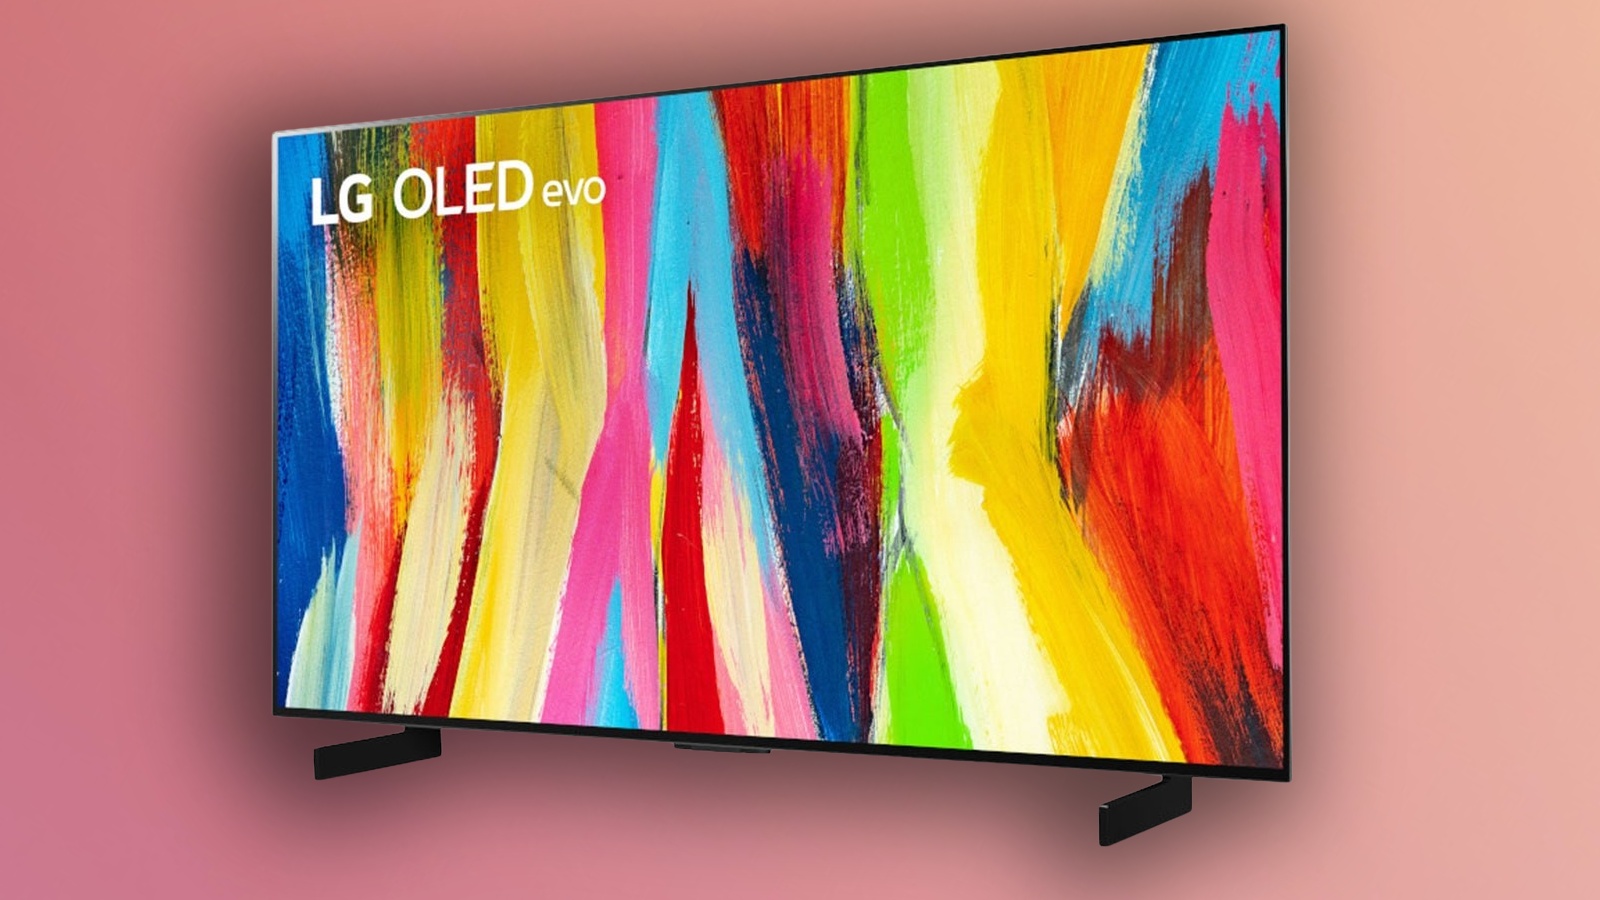 Save as much as 0 on an LG C2 OLED TV this Black Friday – Egaxo